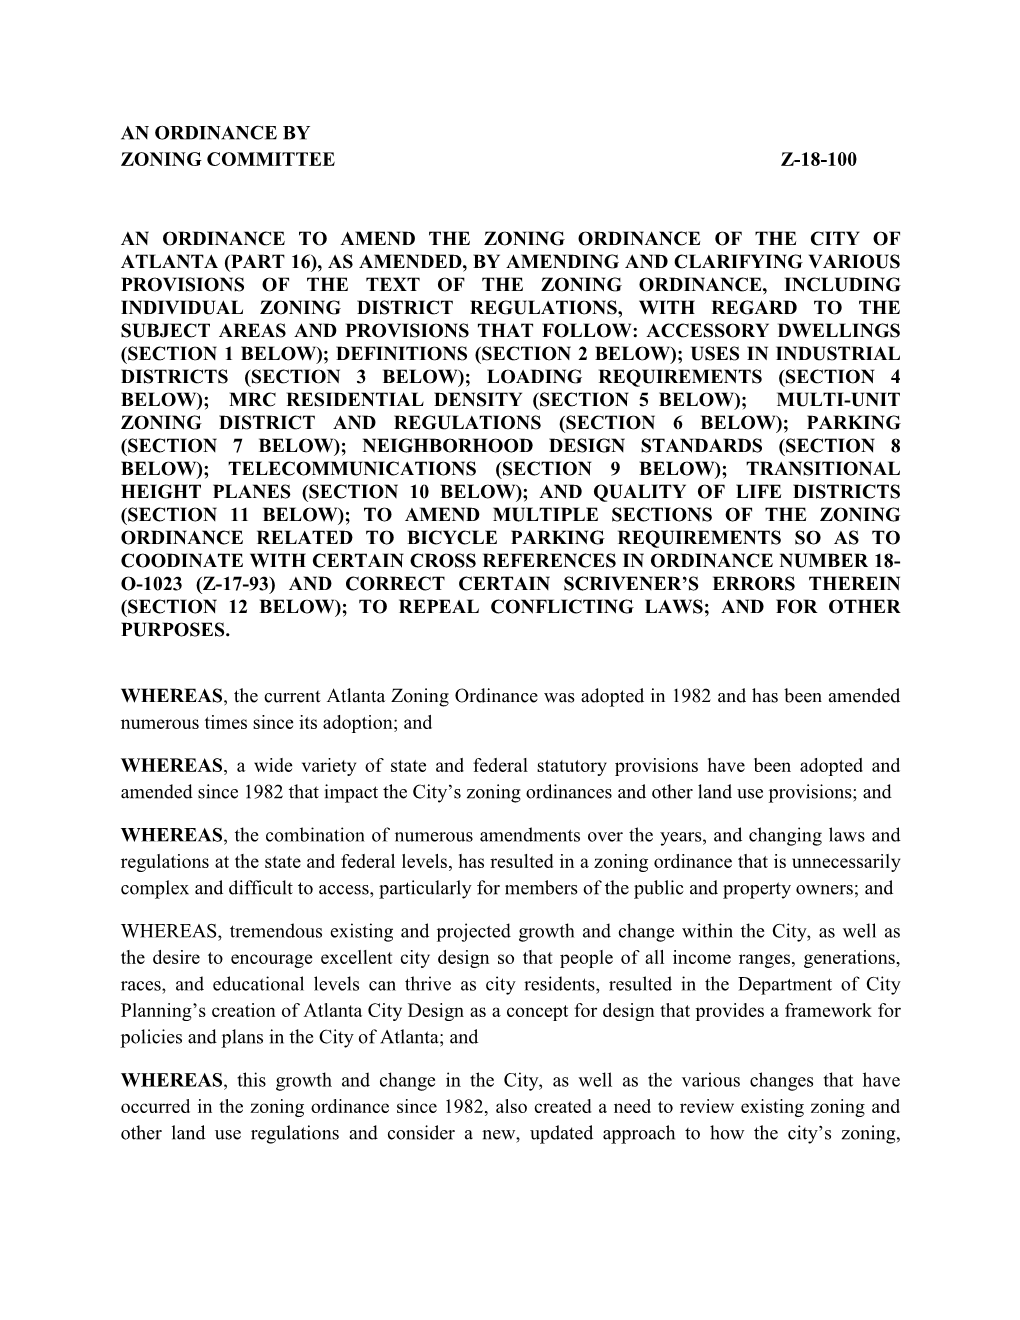 An Ordinance by Zoning Committee Z-18-100